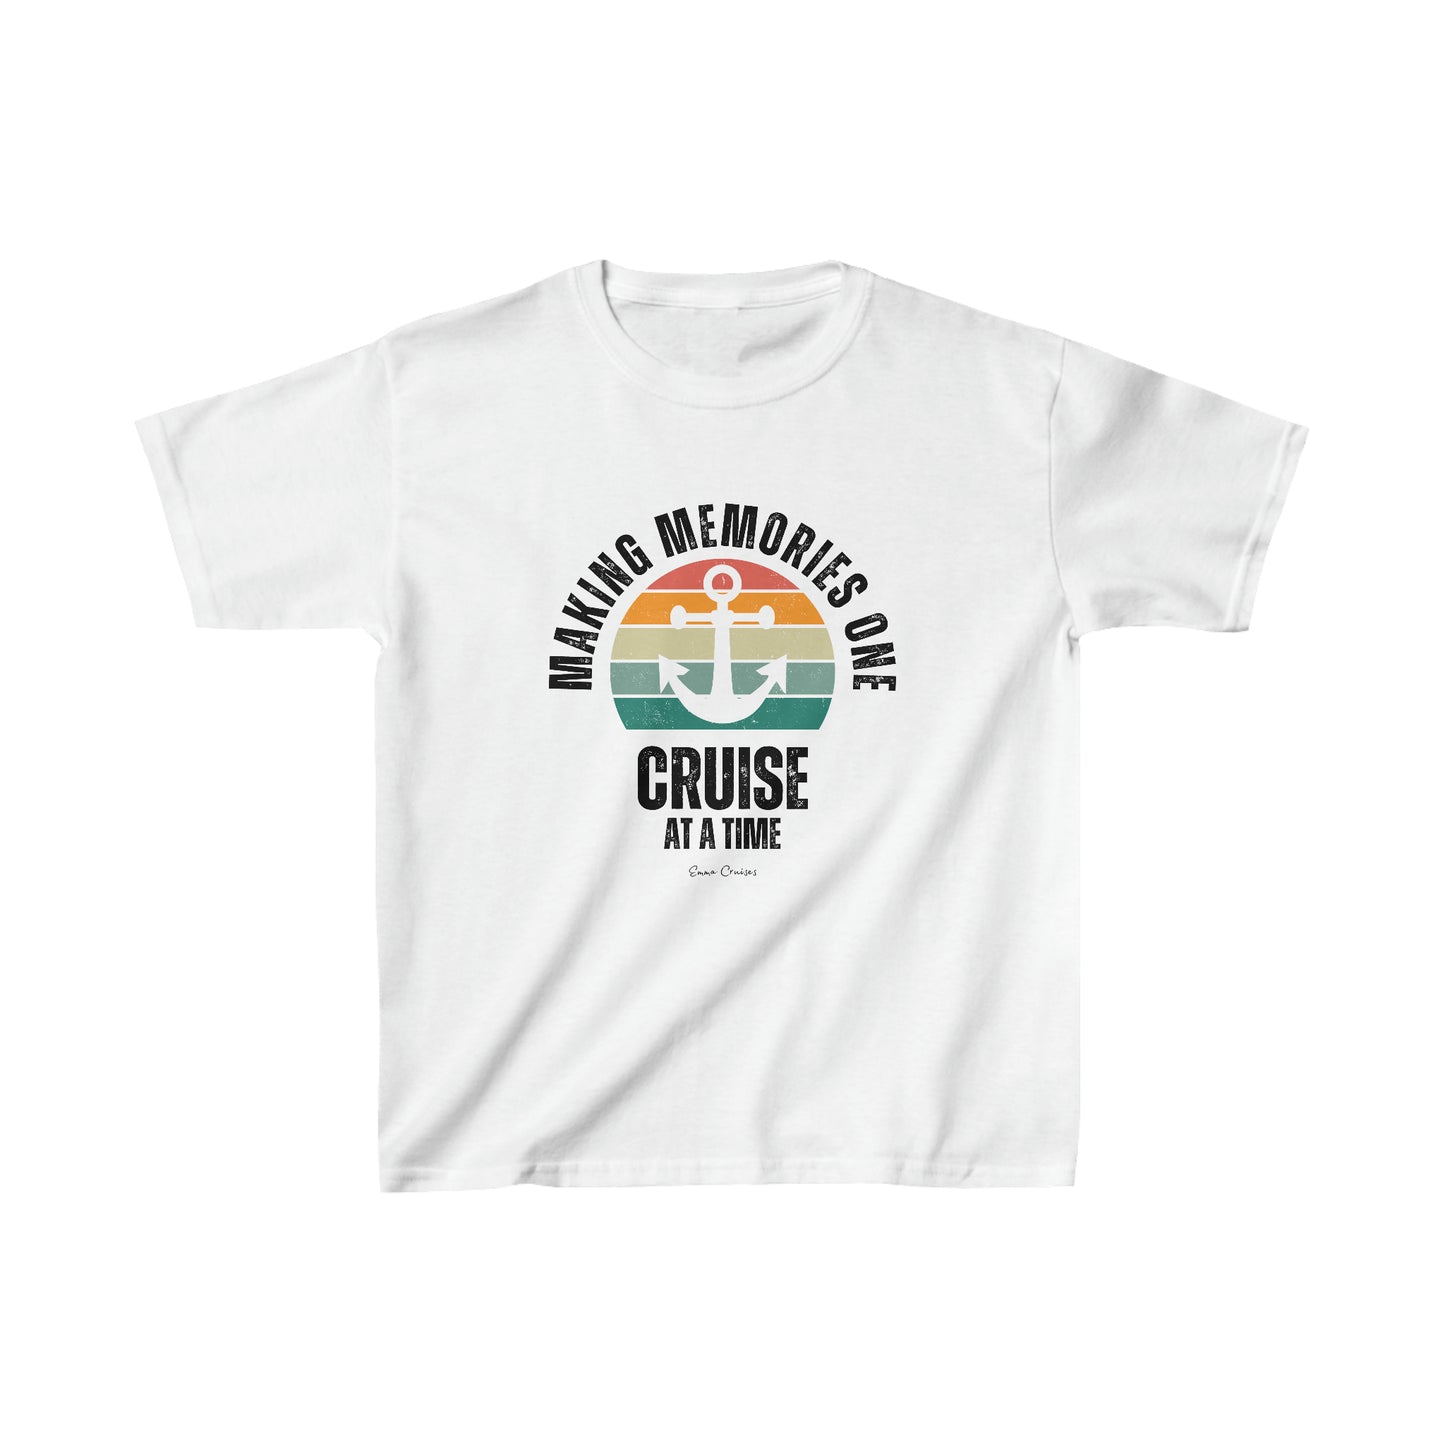 Making Memories One Cruise at a Time - Kids UNISEX T-Shirt